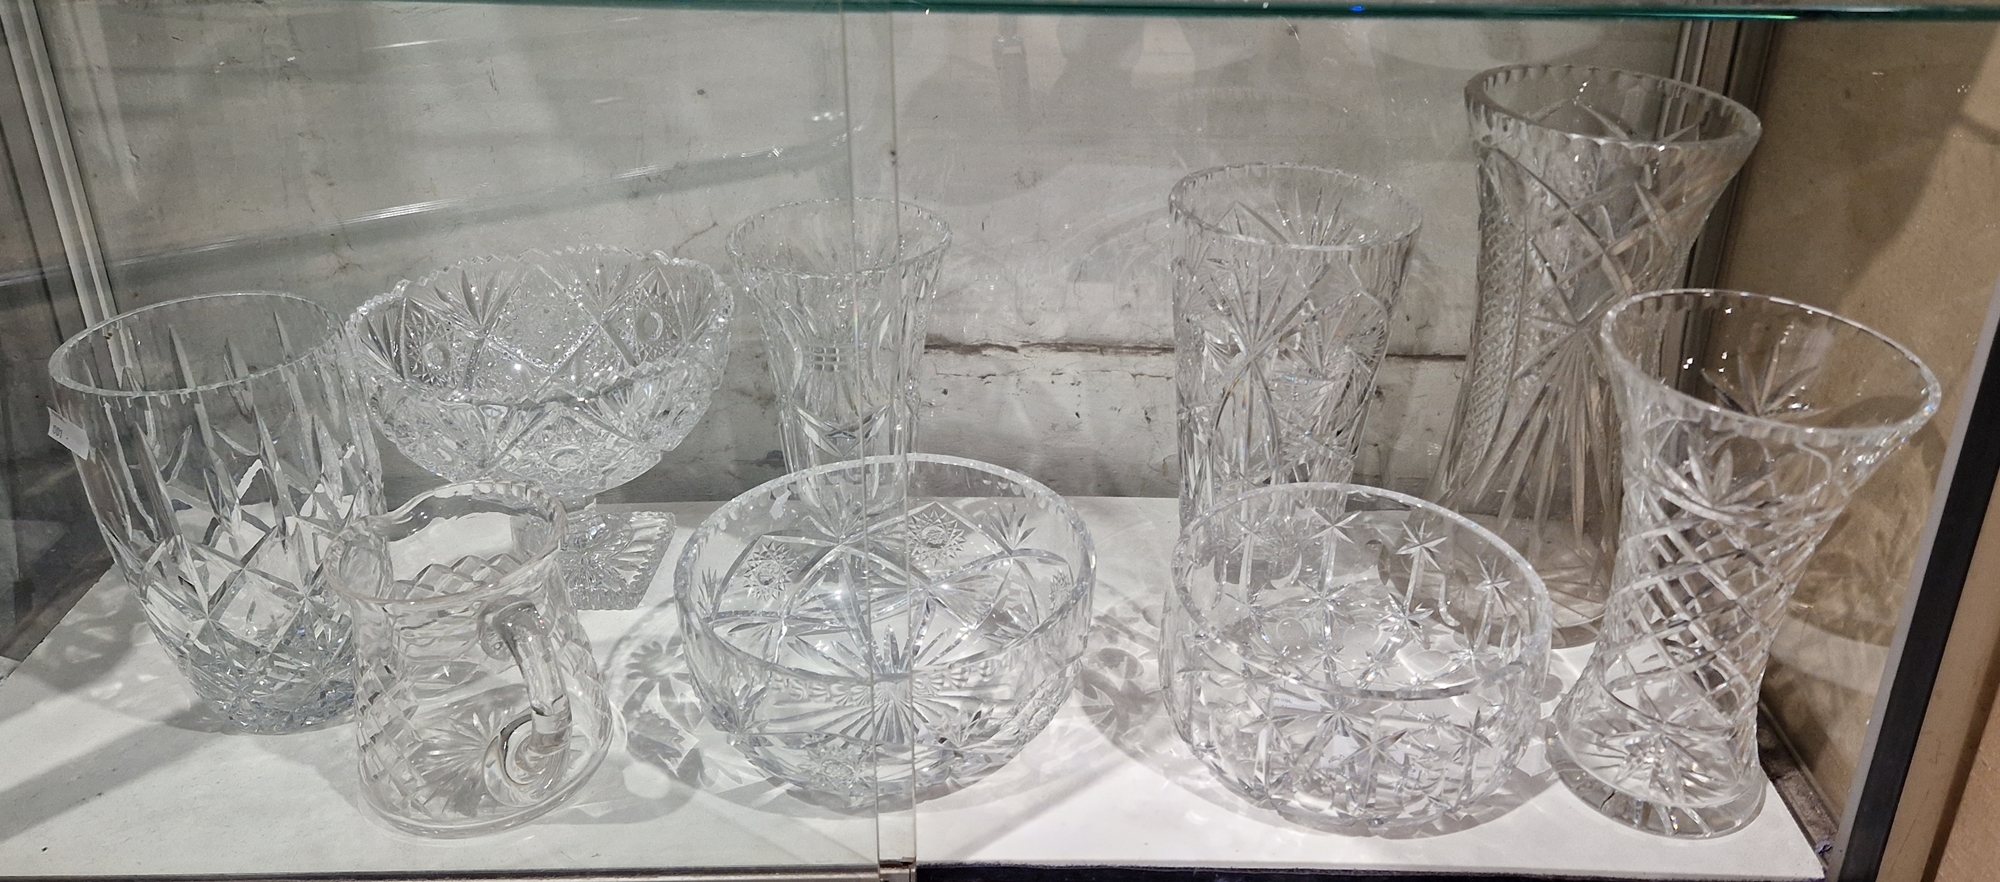 Assorted cut glass flower vases in sizes, a footed bowl, two other bowls and a water jug - Image 2 of 3